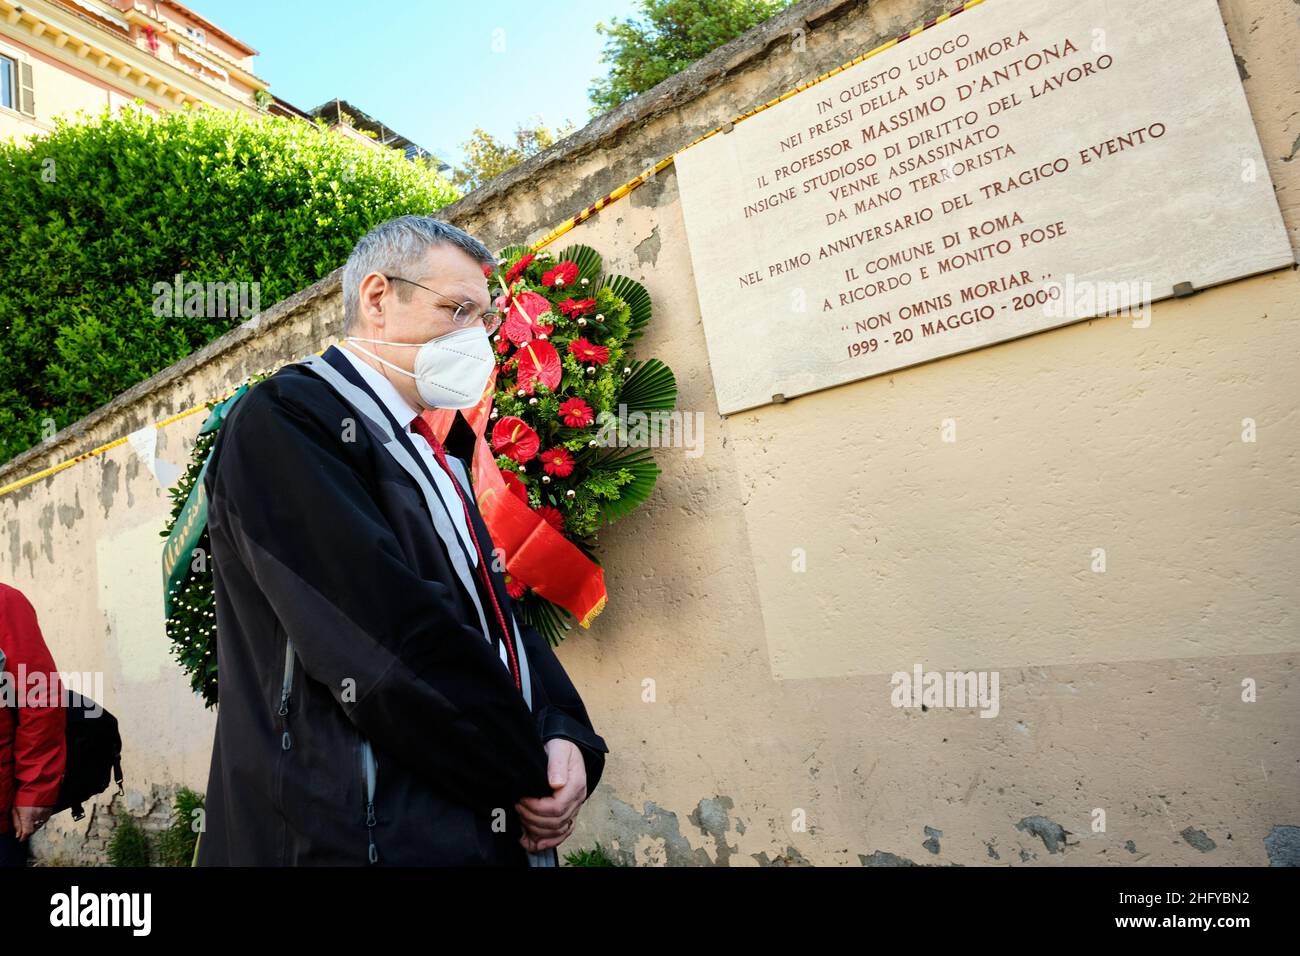 Mauro Scrobogna /LaPresse May 20, 2021 Rome, Italy News Terrorism - anniversary of the murder of D’Antona In the photo: the General Secretary of the CGIL Maurizio Landini pays tribute to the plaque in memory of Massimo D’Antona killed by the Red Brigades in Via Salaria on 20 May 2000 Stock Photo